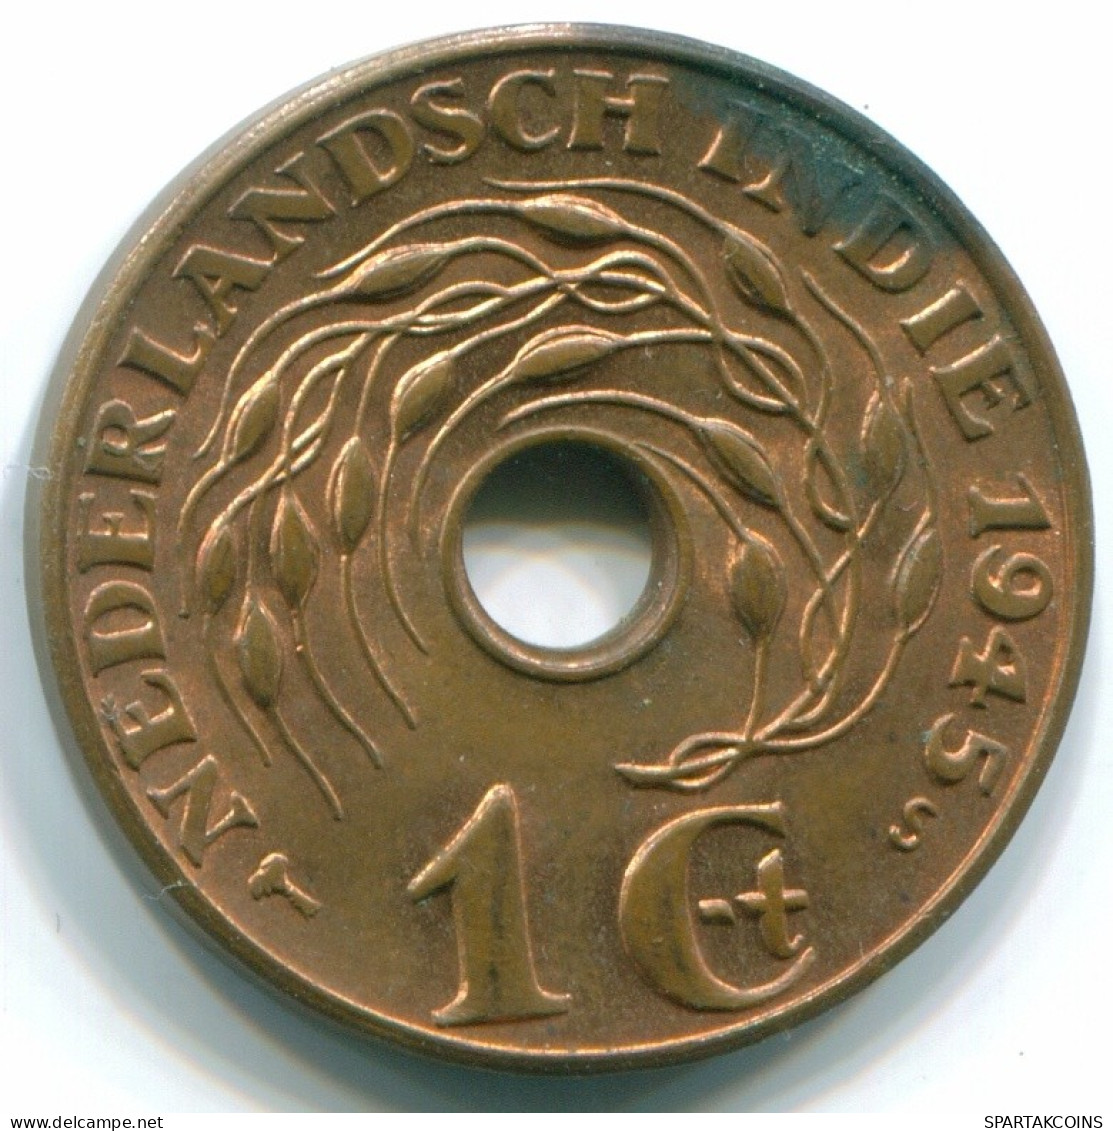 1 CENT 1945 S NETHERLANDS EAST INDIES INDONESIA Bronze Colonial Coin #S10409.U.A - Indes Neerlandesas